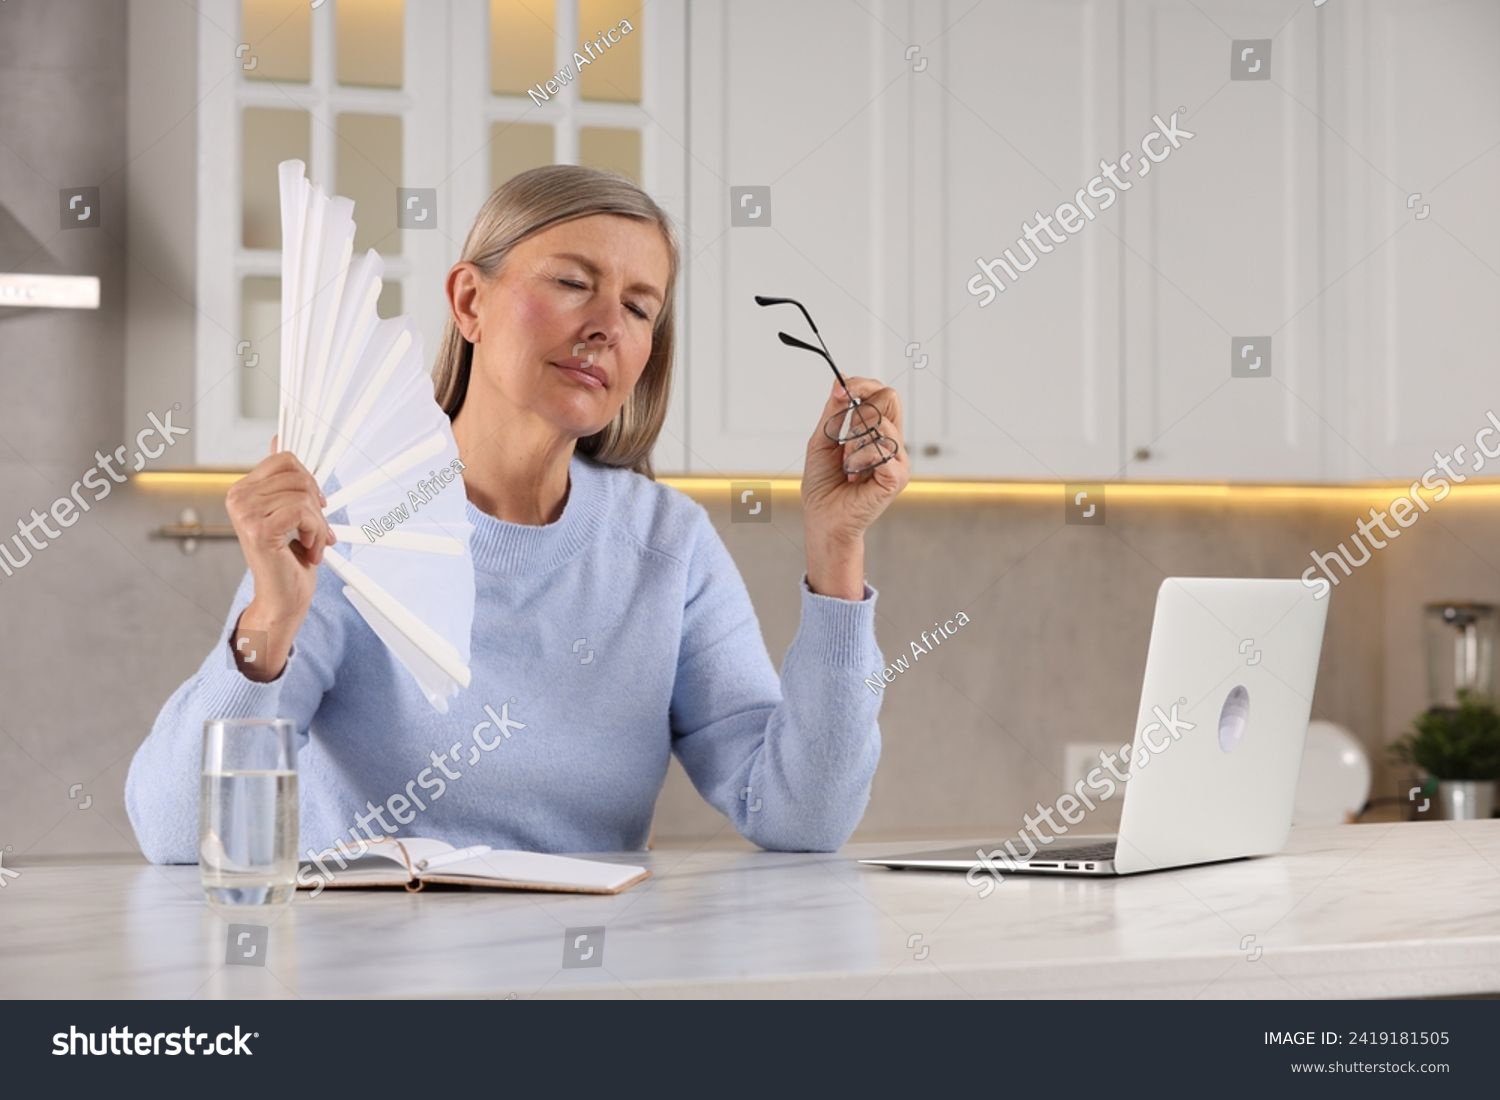 Menopause. Woman waving hand fan to cool herself during hot flash at table in kitchen #2419181505